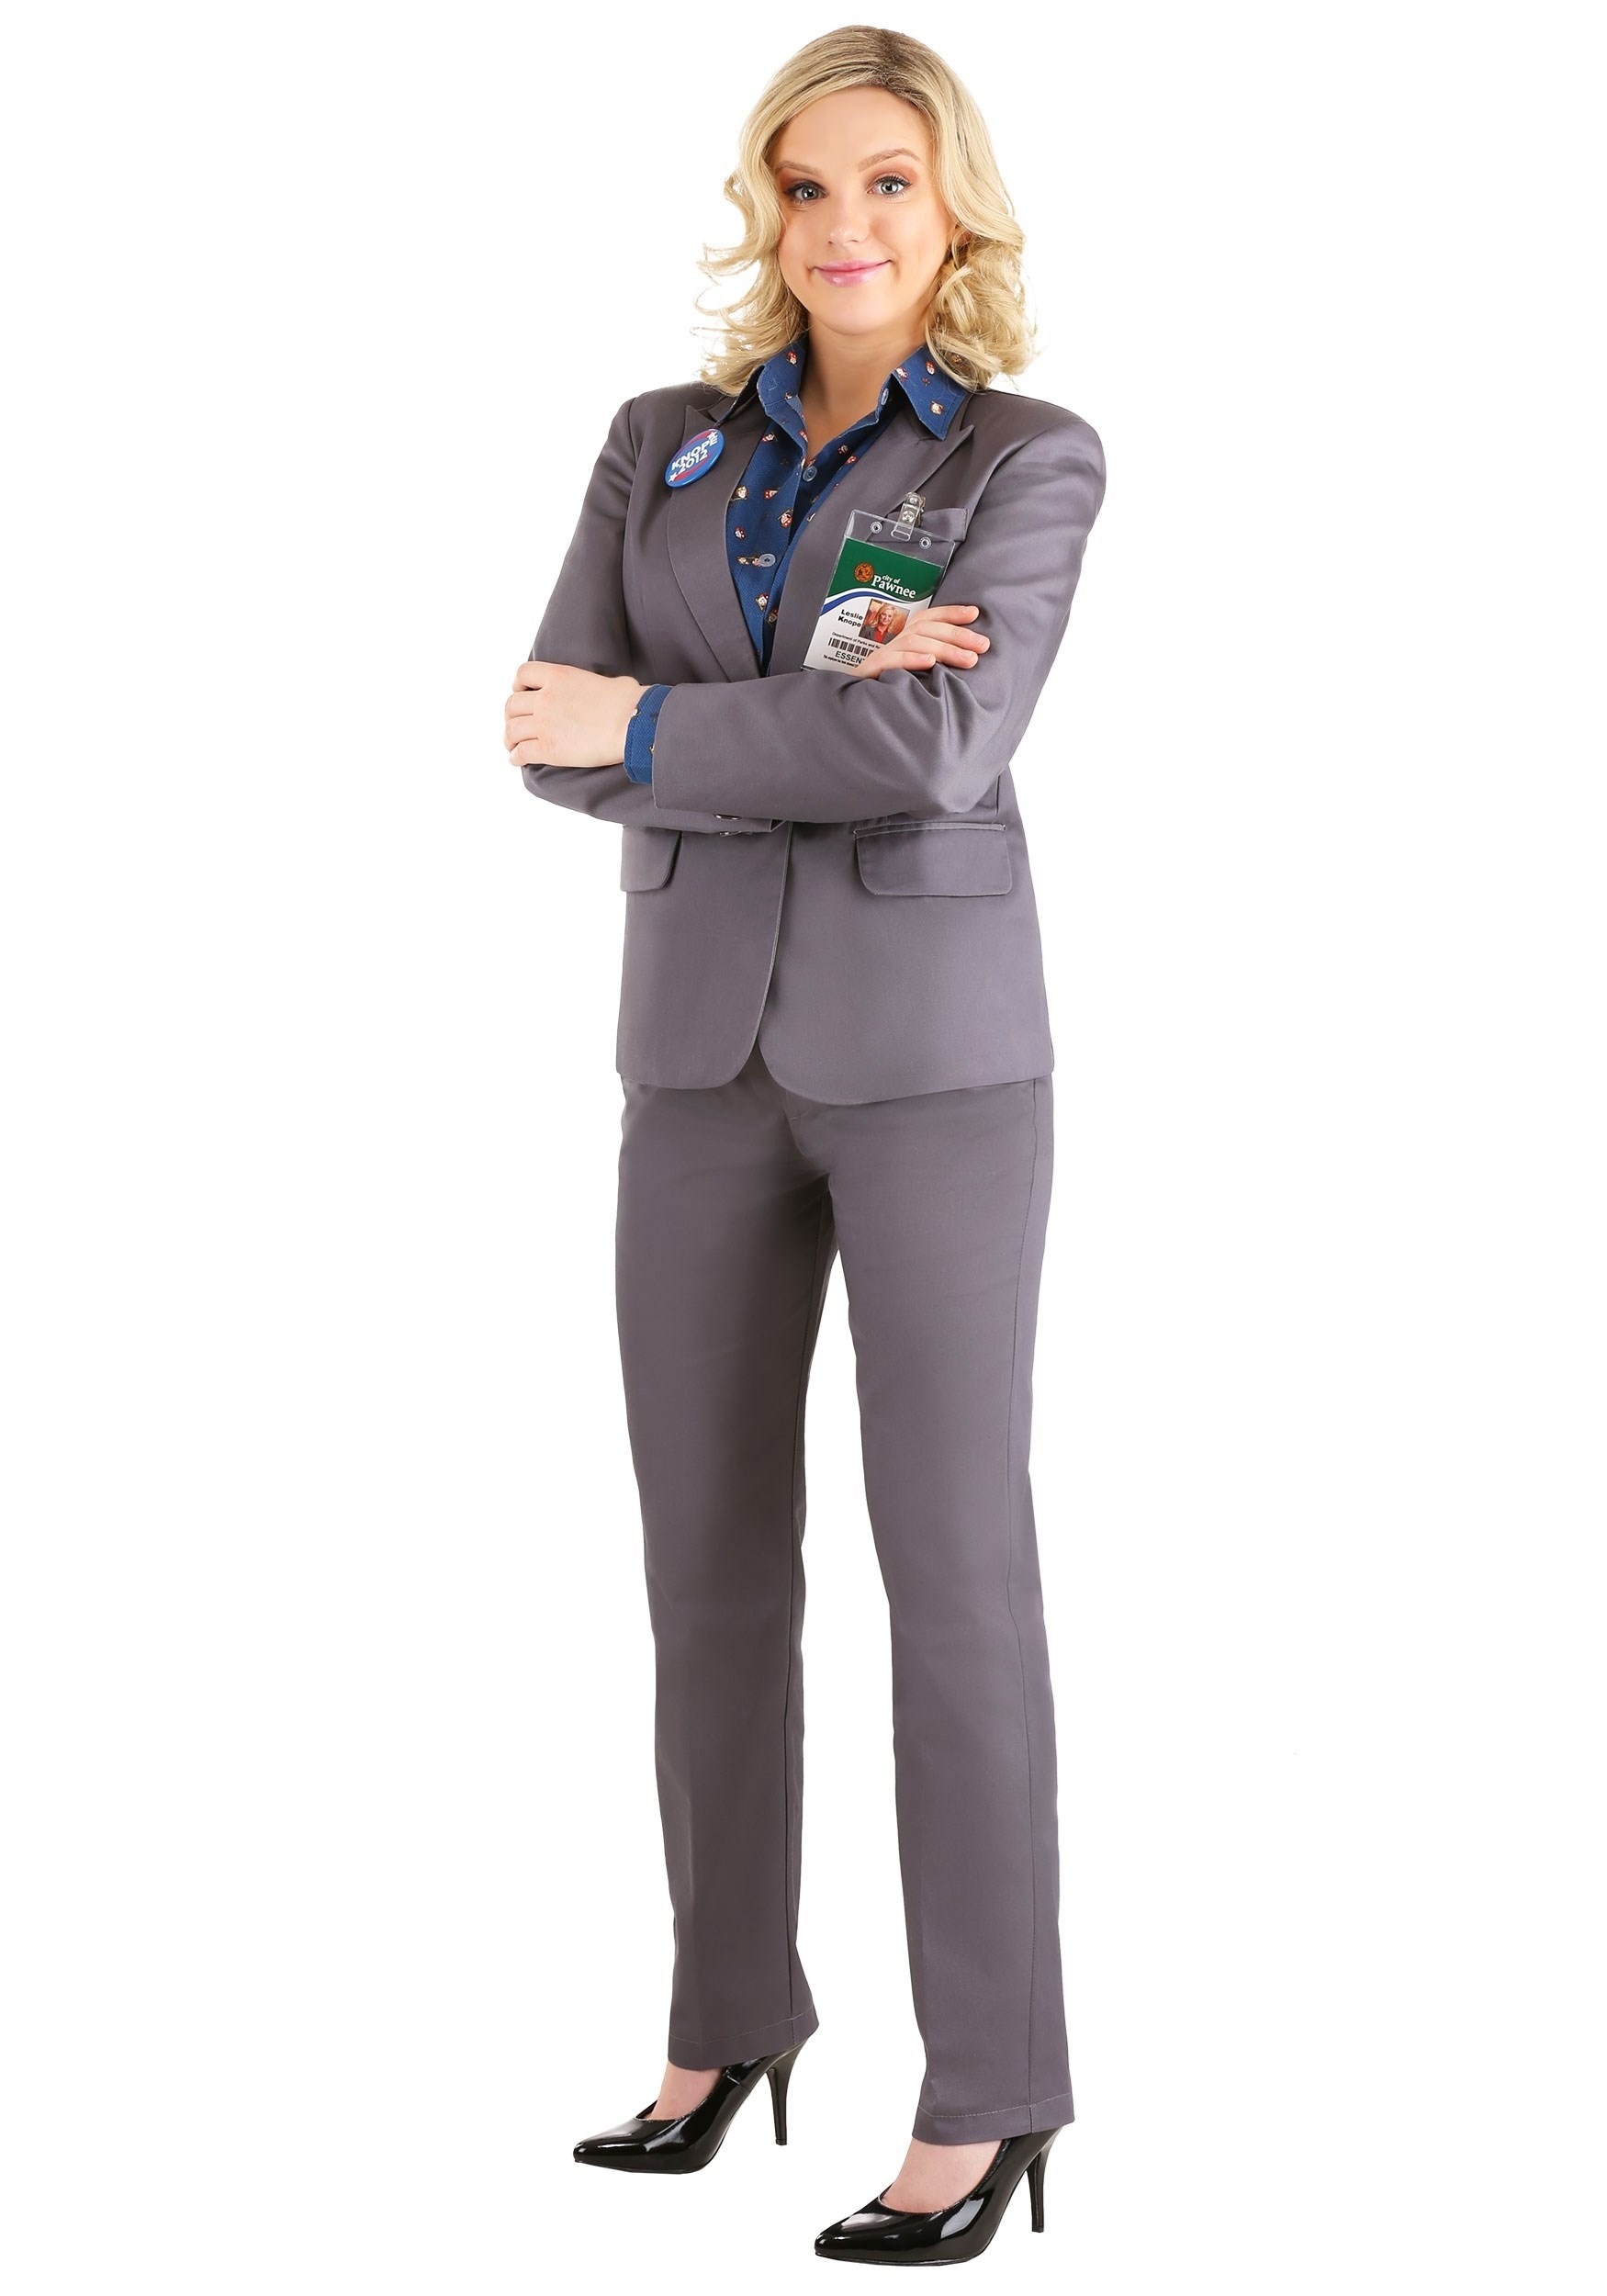 Image of Leslie Knope Parks and Recreation Costume ID FUN1480AD-L